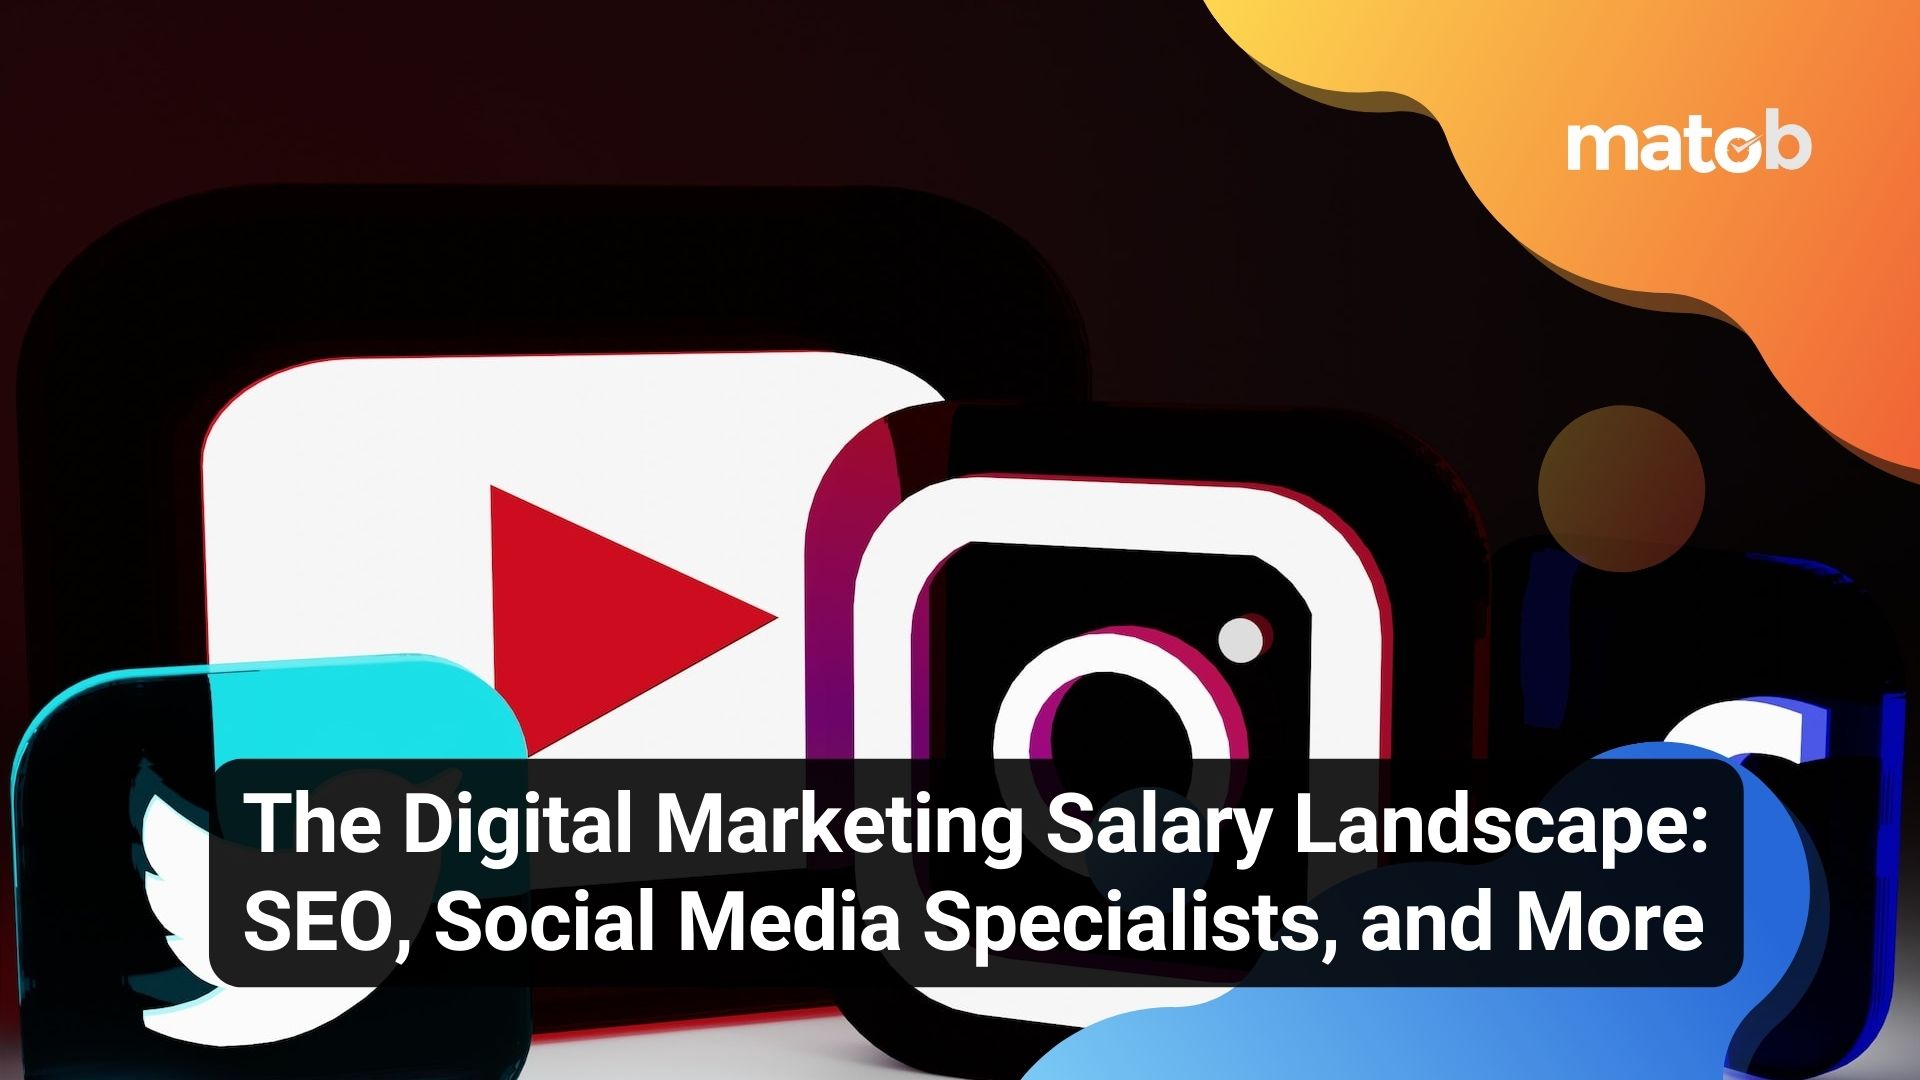 The Digital Marketing Salary Landscape: SEO, Social Media Specialists, and More